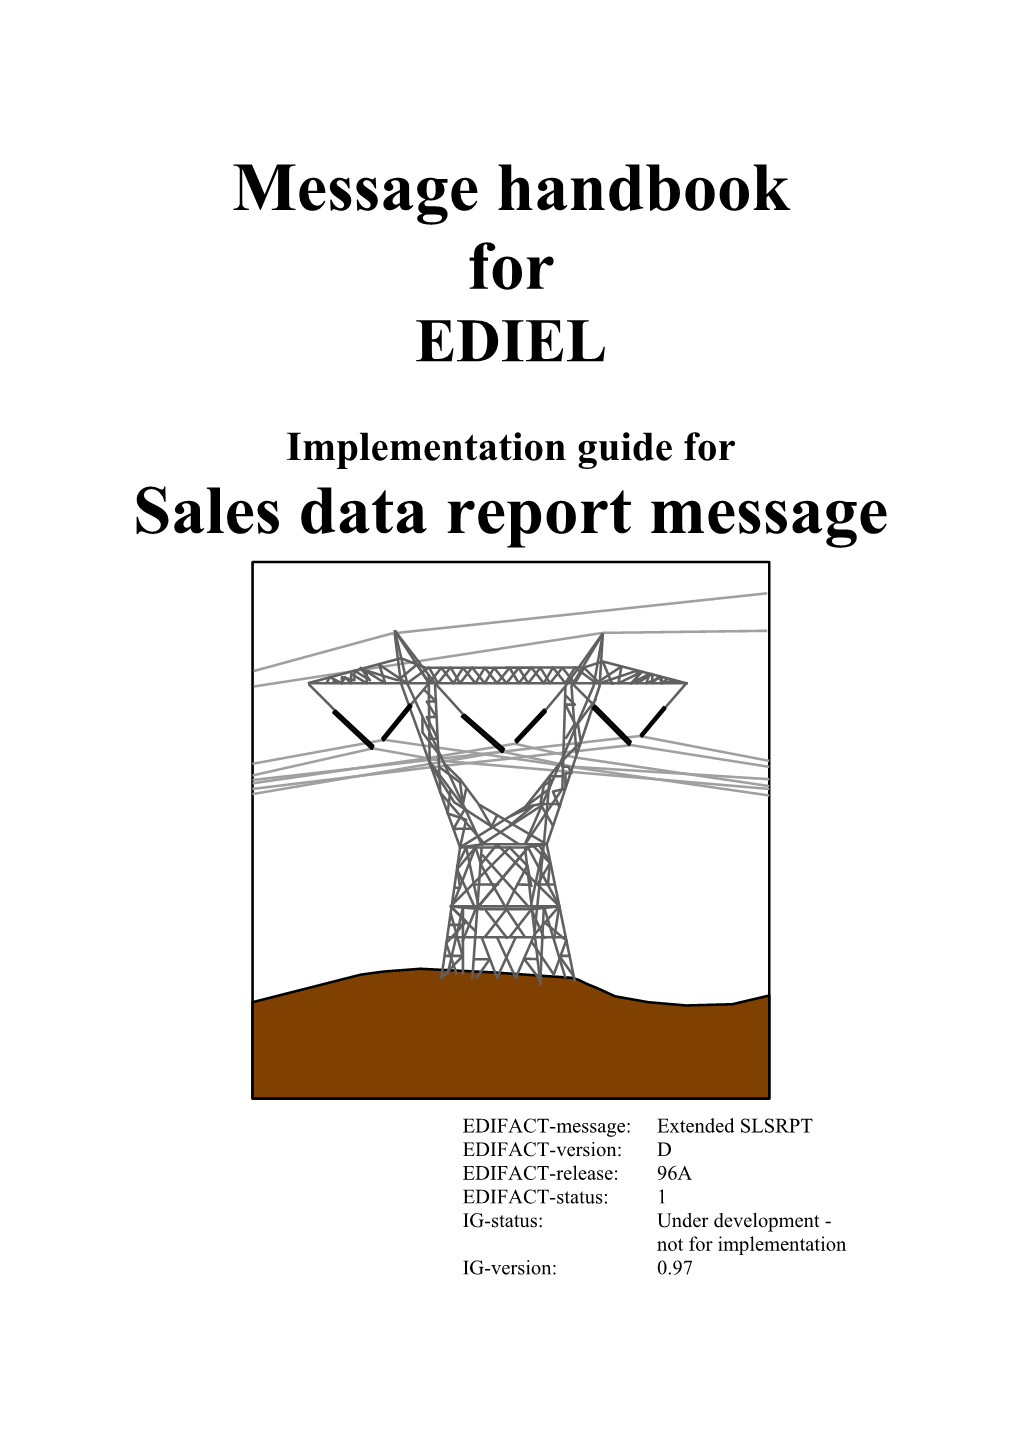 Implementation Guide for the Sales Data Report Message1